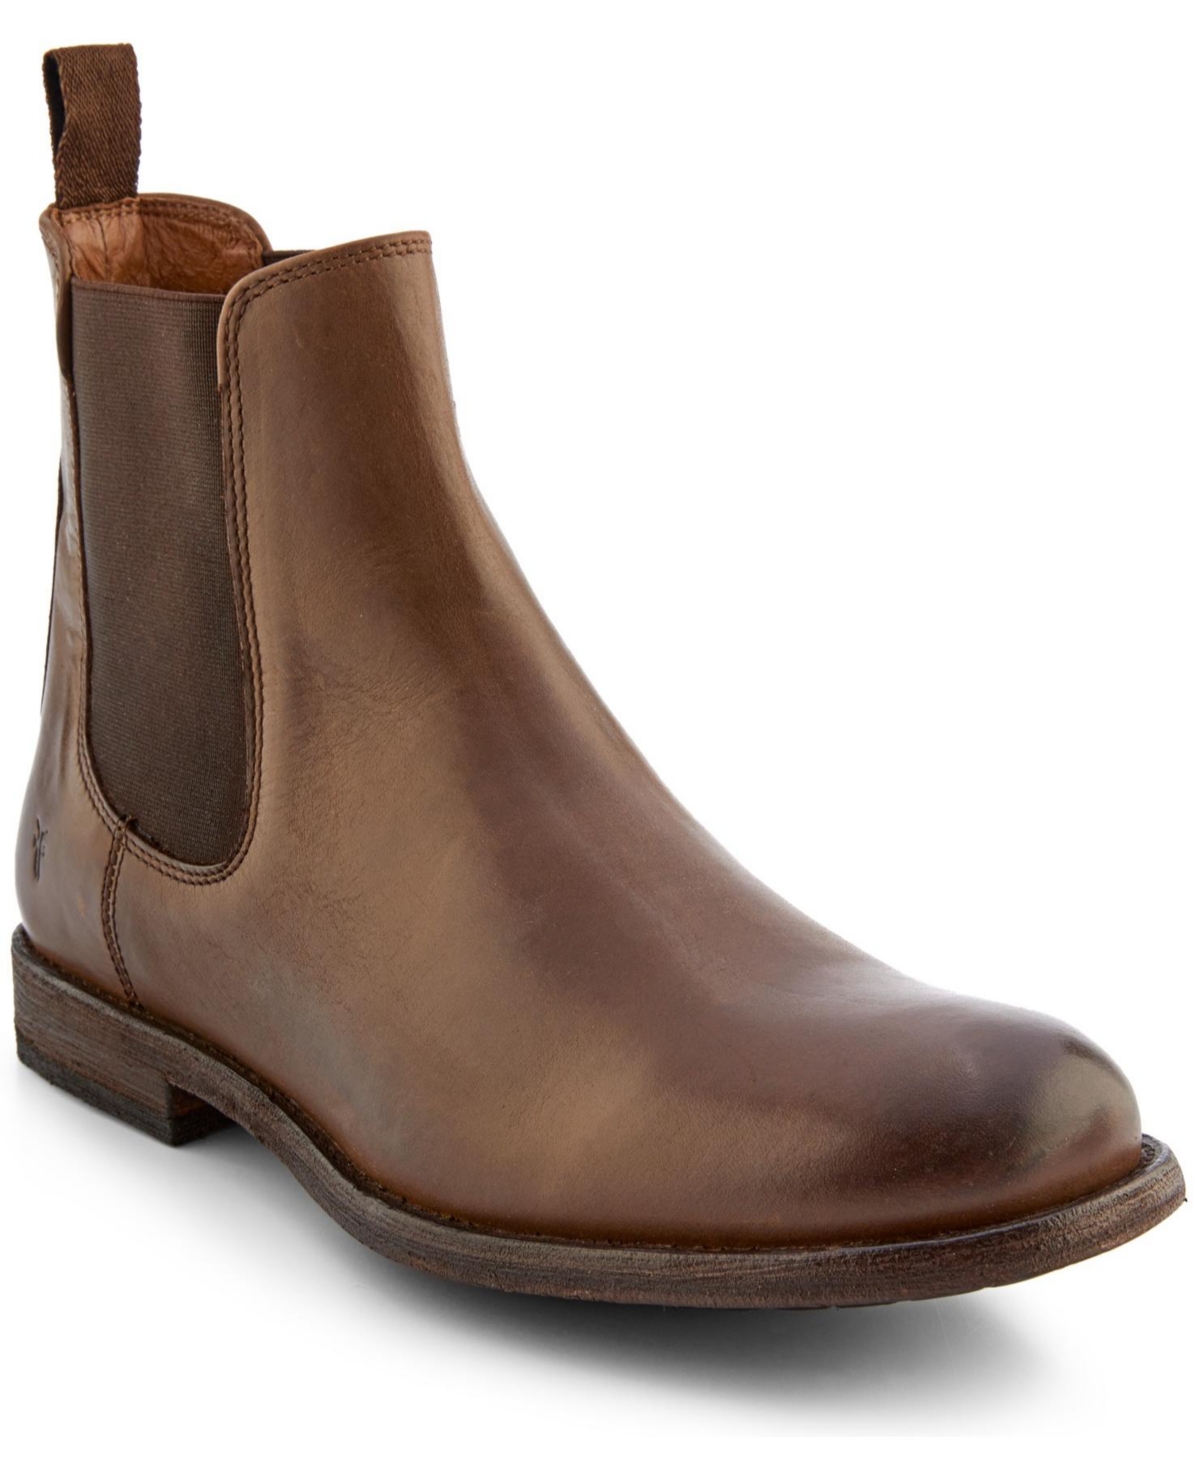 Men's Tyler Leather Chelsea Boots - Tan Leather